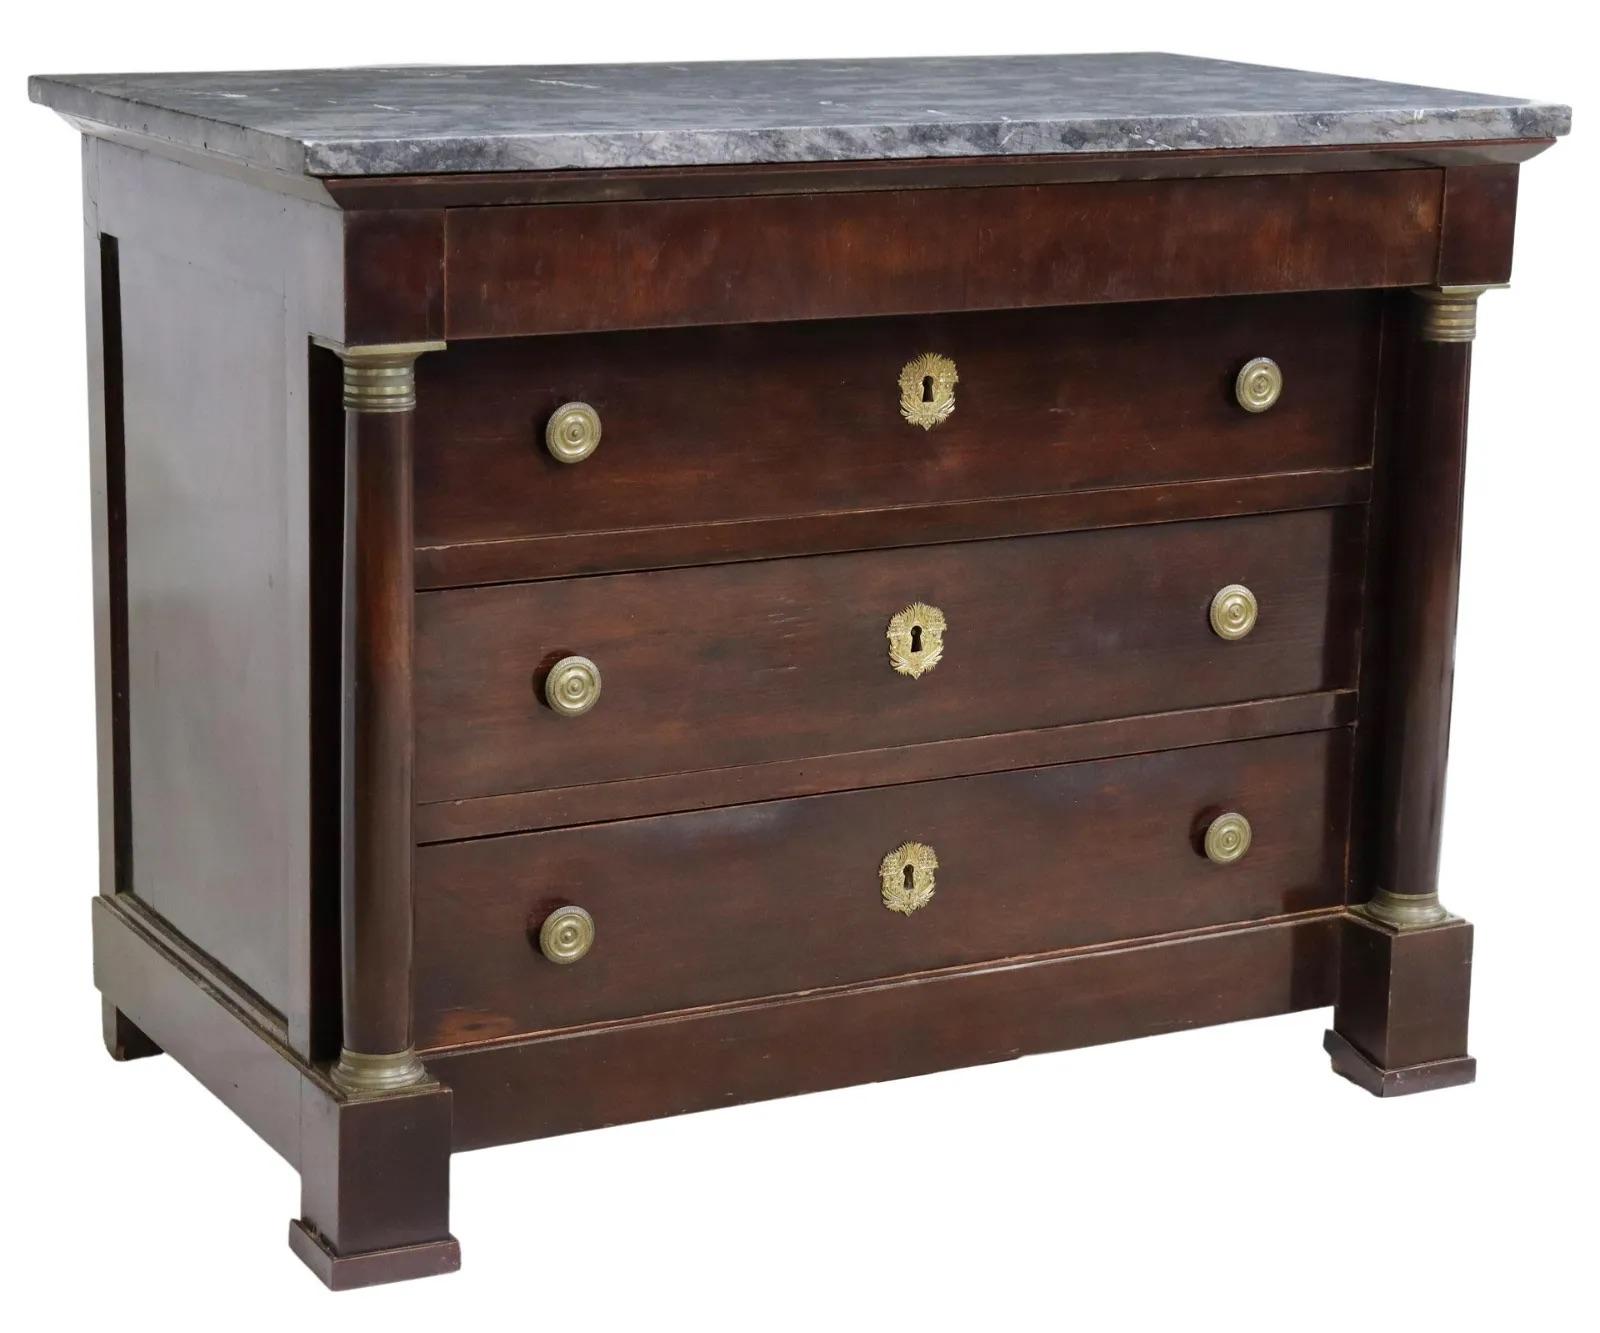 Antique French Empire Style Marble-Top Mahogany Commode In Good Condition For Sale In Sheridan, CO